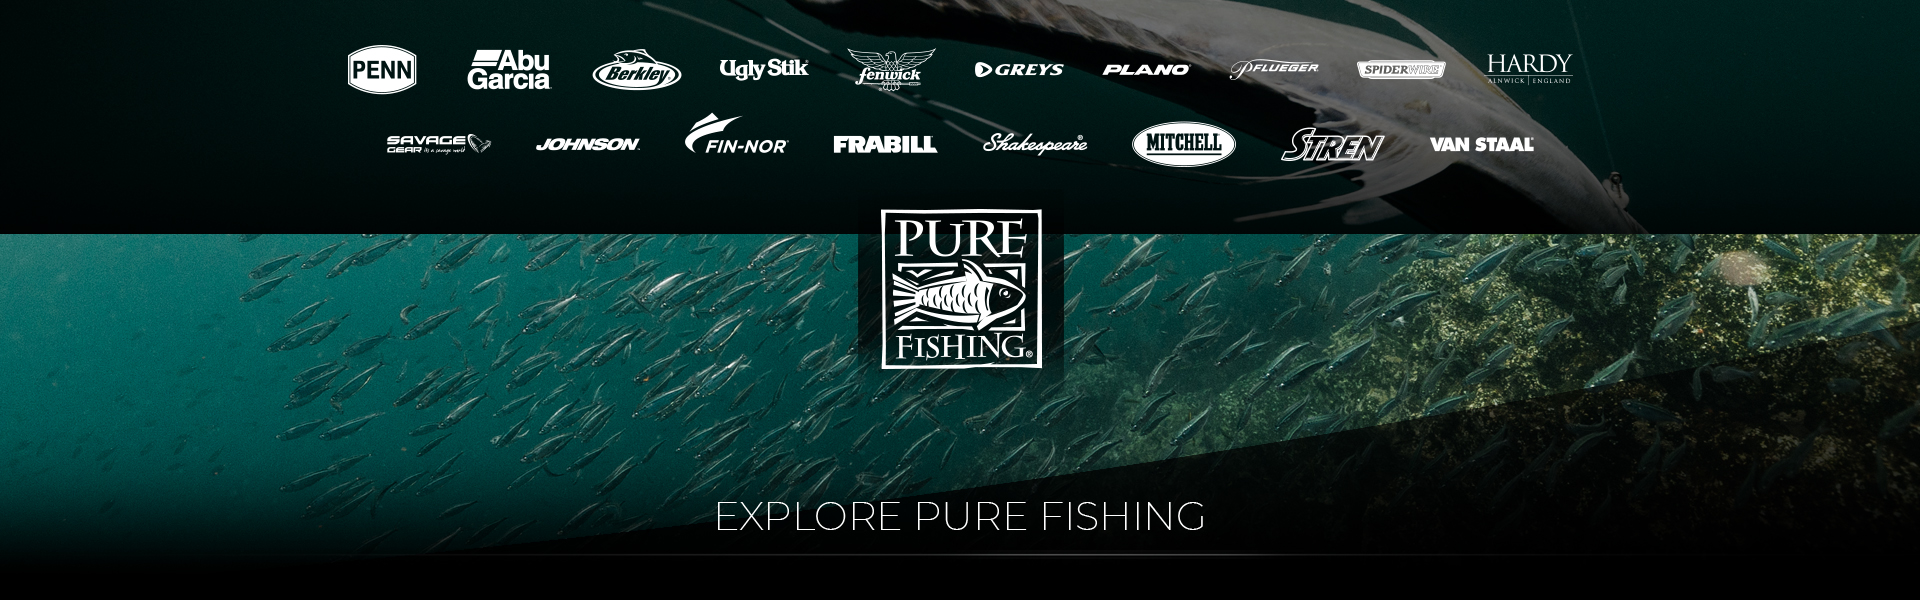 Meet the Pros - Pure Fishing